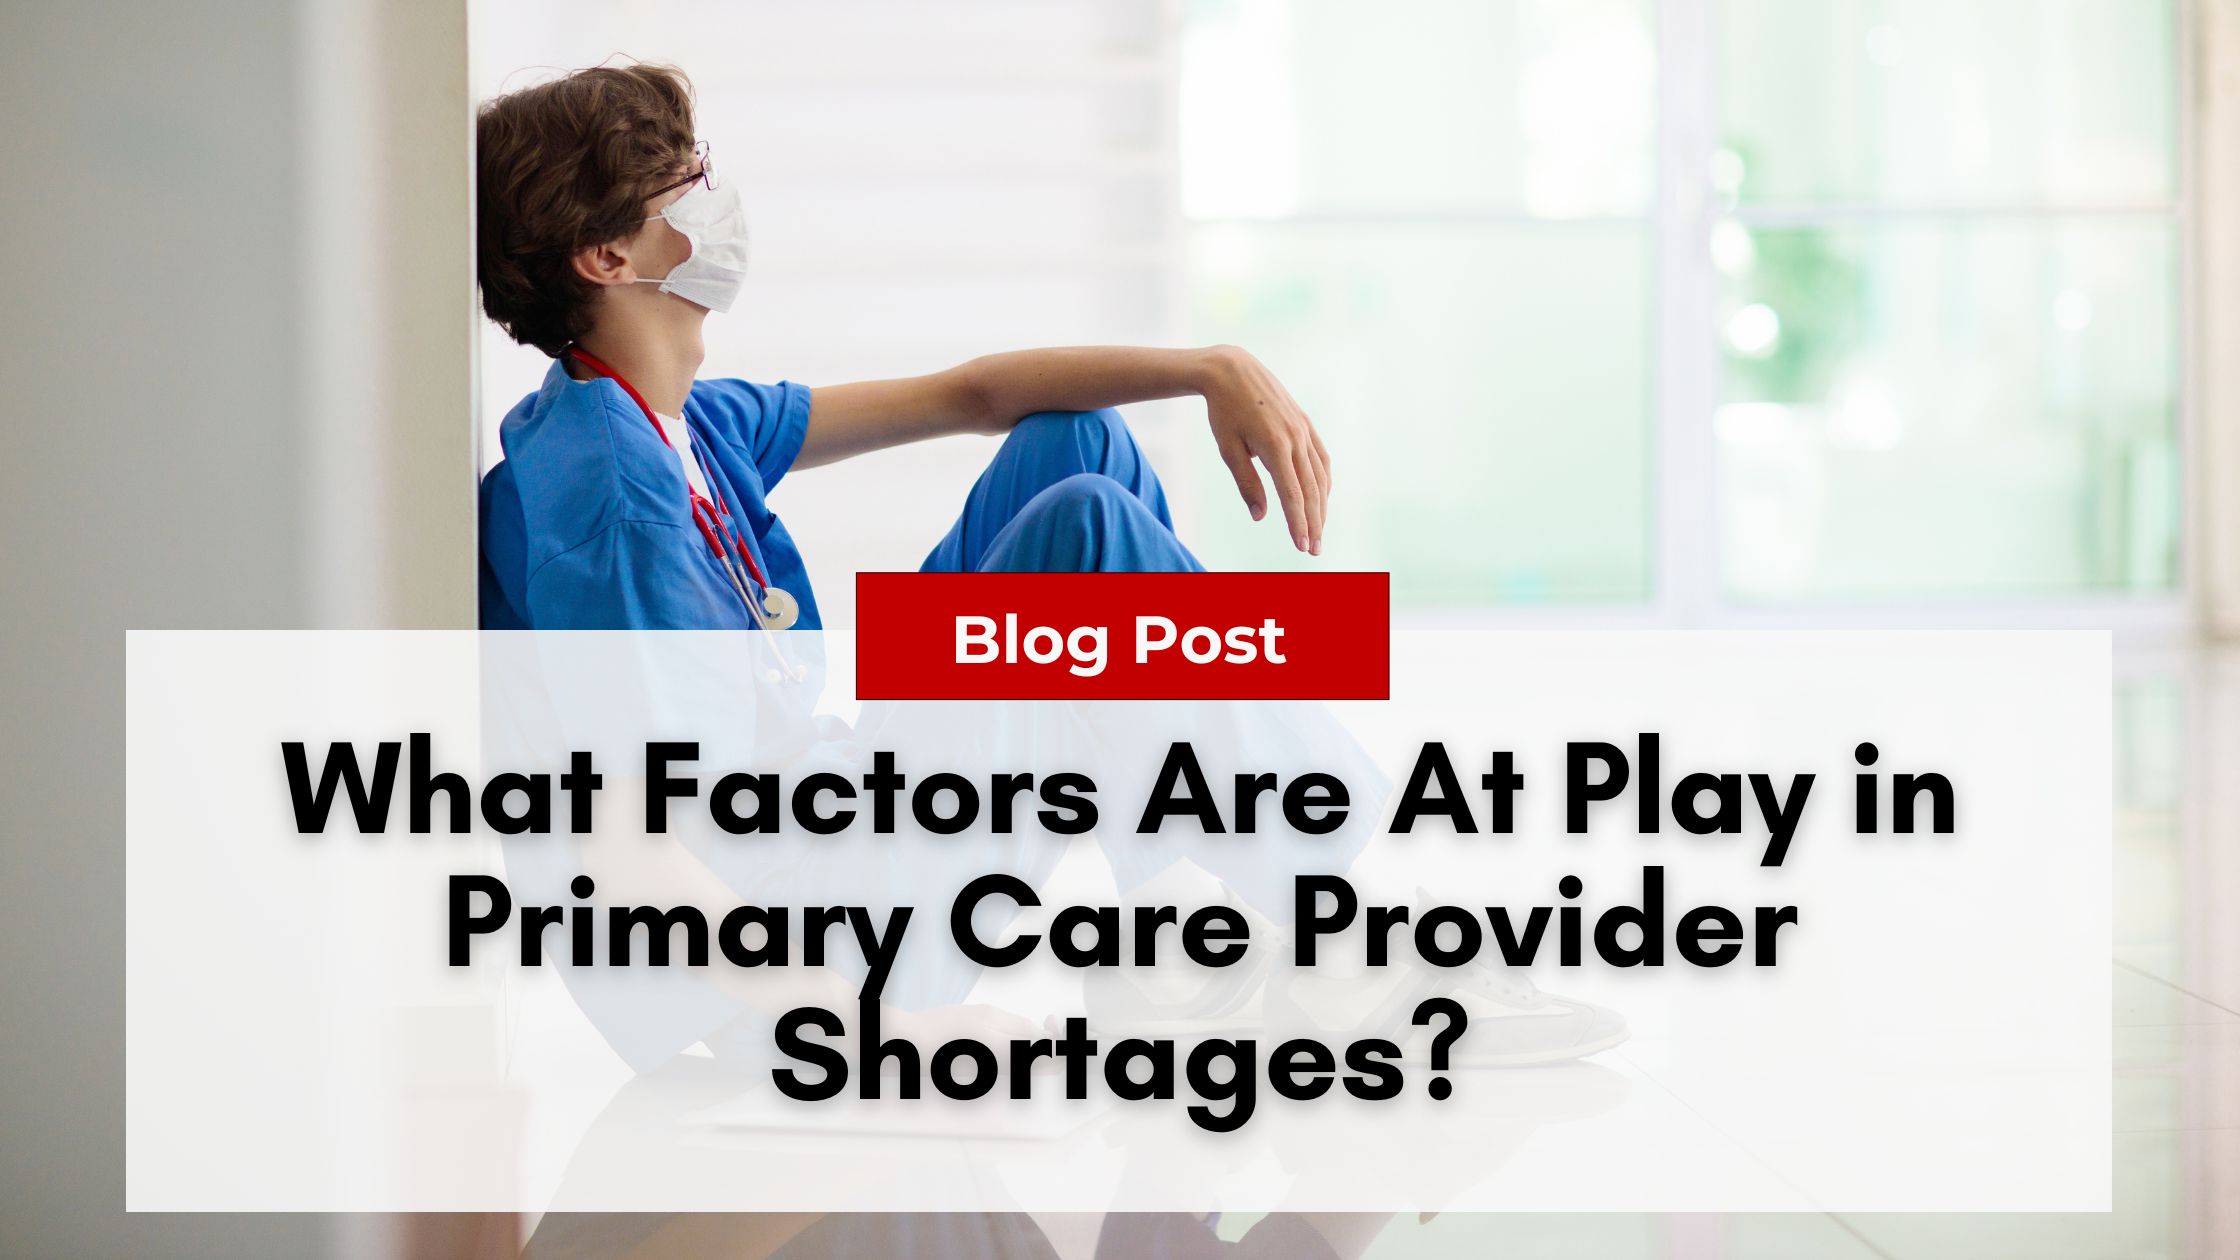 Person in medical scrubs and a mask sitting on the floor, leaning against a wall. Text overlay reads: "Blog Post: What Factors Are At Play in Primary Care Provider Shortages? Nurse Practitioner Burnout.